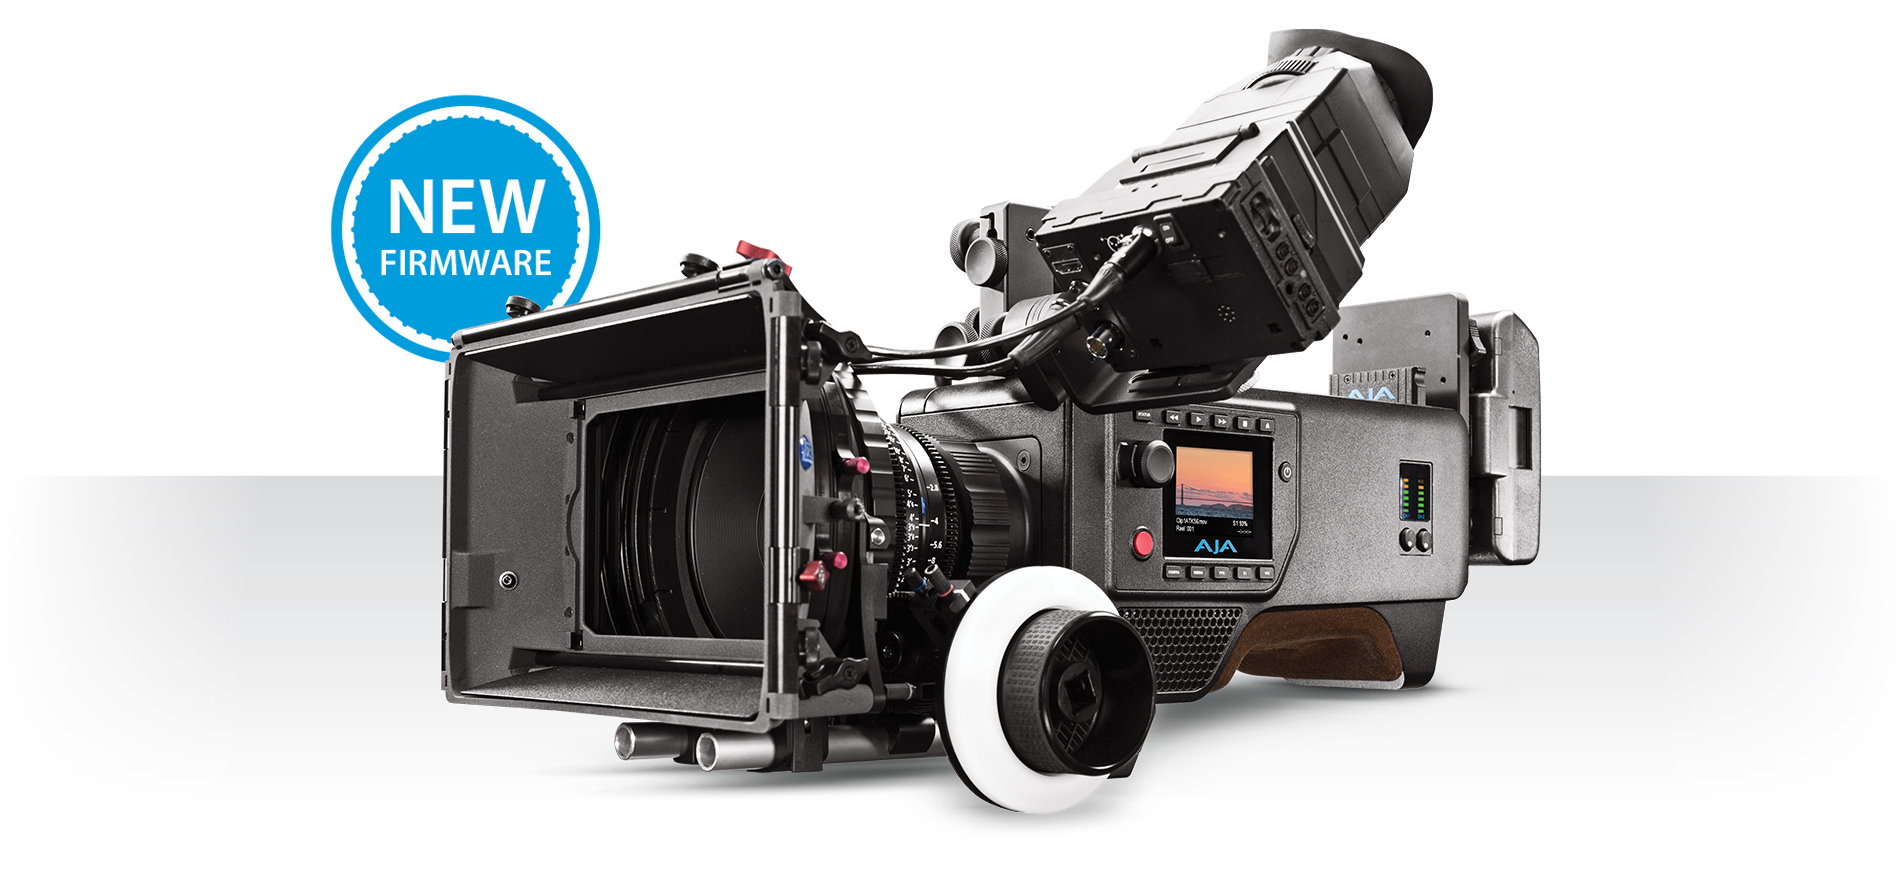 AJA Releases CION v1.3 Firmware with New Gamma Settings; Announces New Pak1000 Promo for CION Purchases